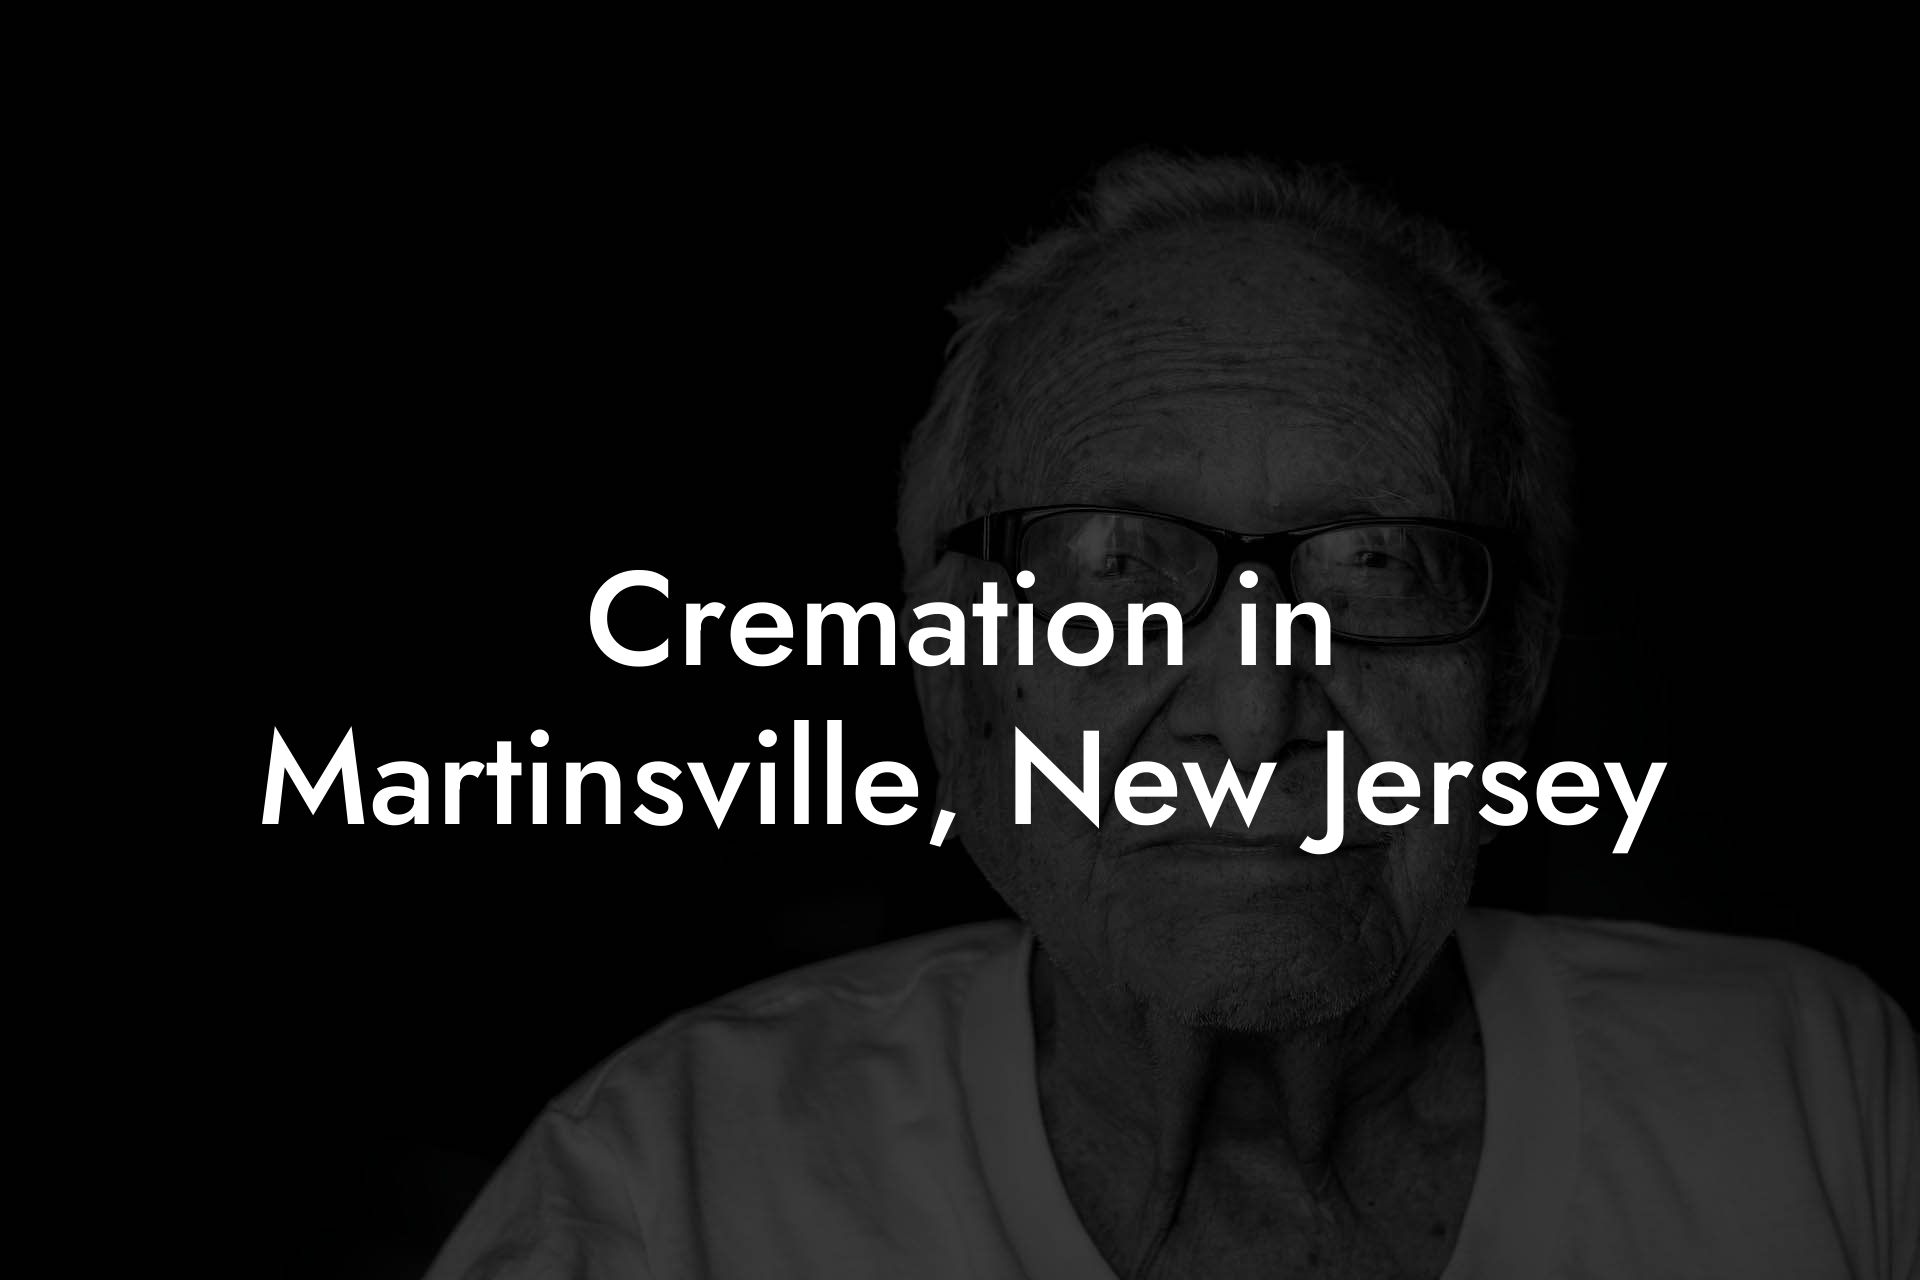 Cremation in Martinsville, New Jersey